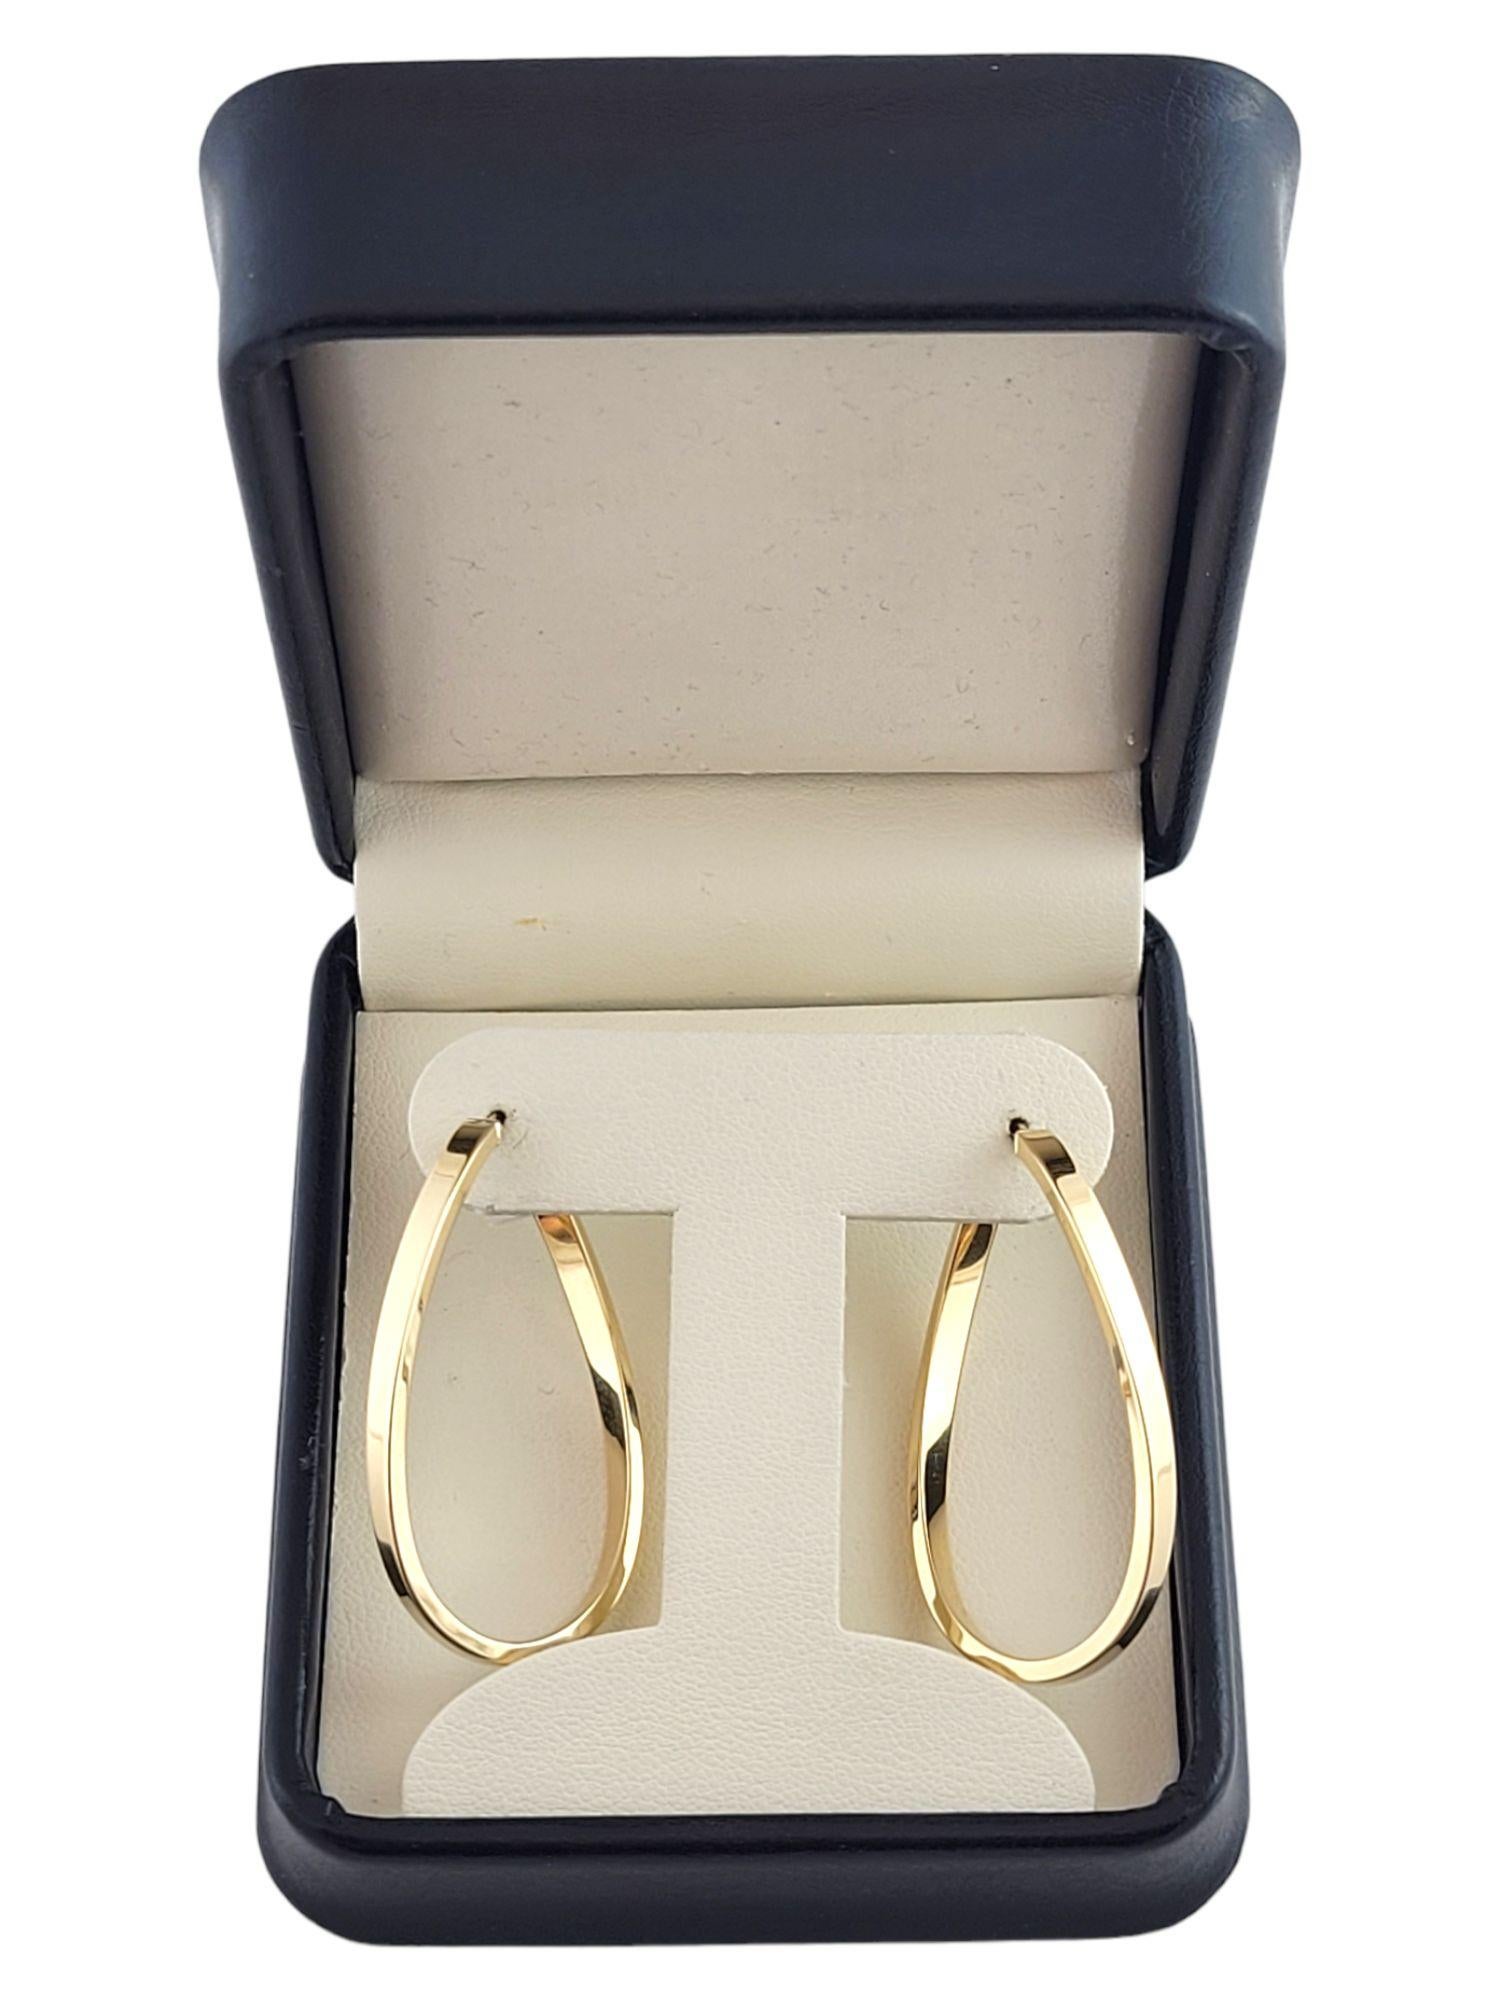 18K Yellow Gold Curved Oval Hoop Earrings #14795 For Sale 2